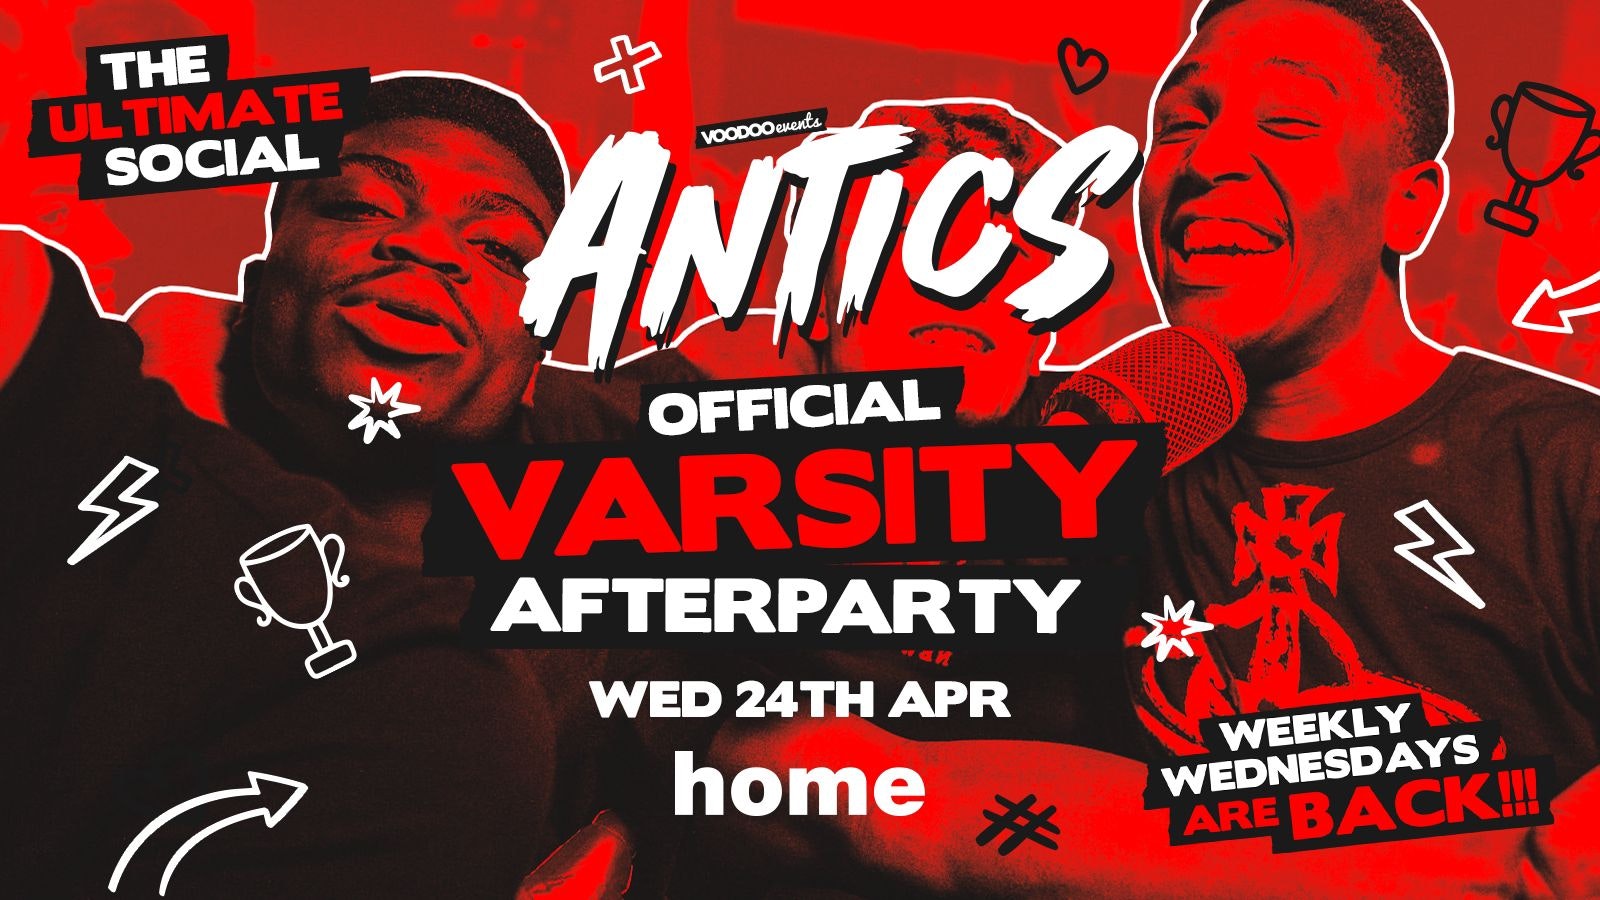 Antics @ THE BRAND NEW SUPER CLUB HOME – The OFFICIAL Varsity Afterparty – Wednesday 24th April